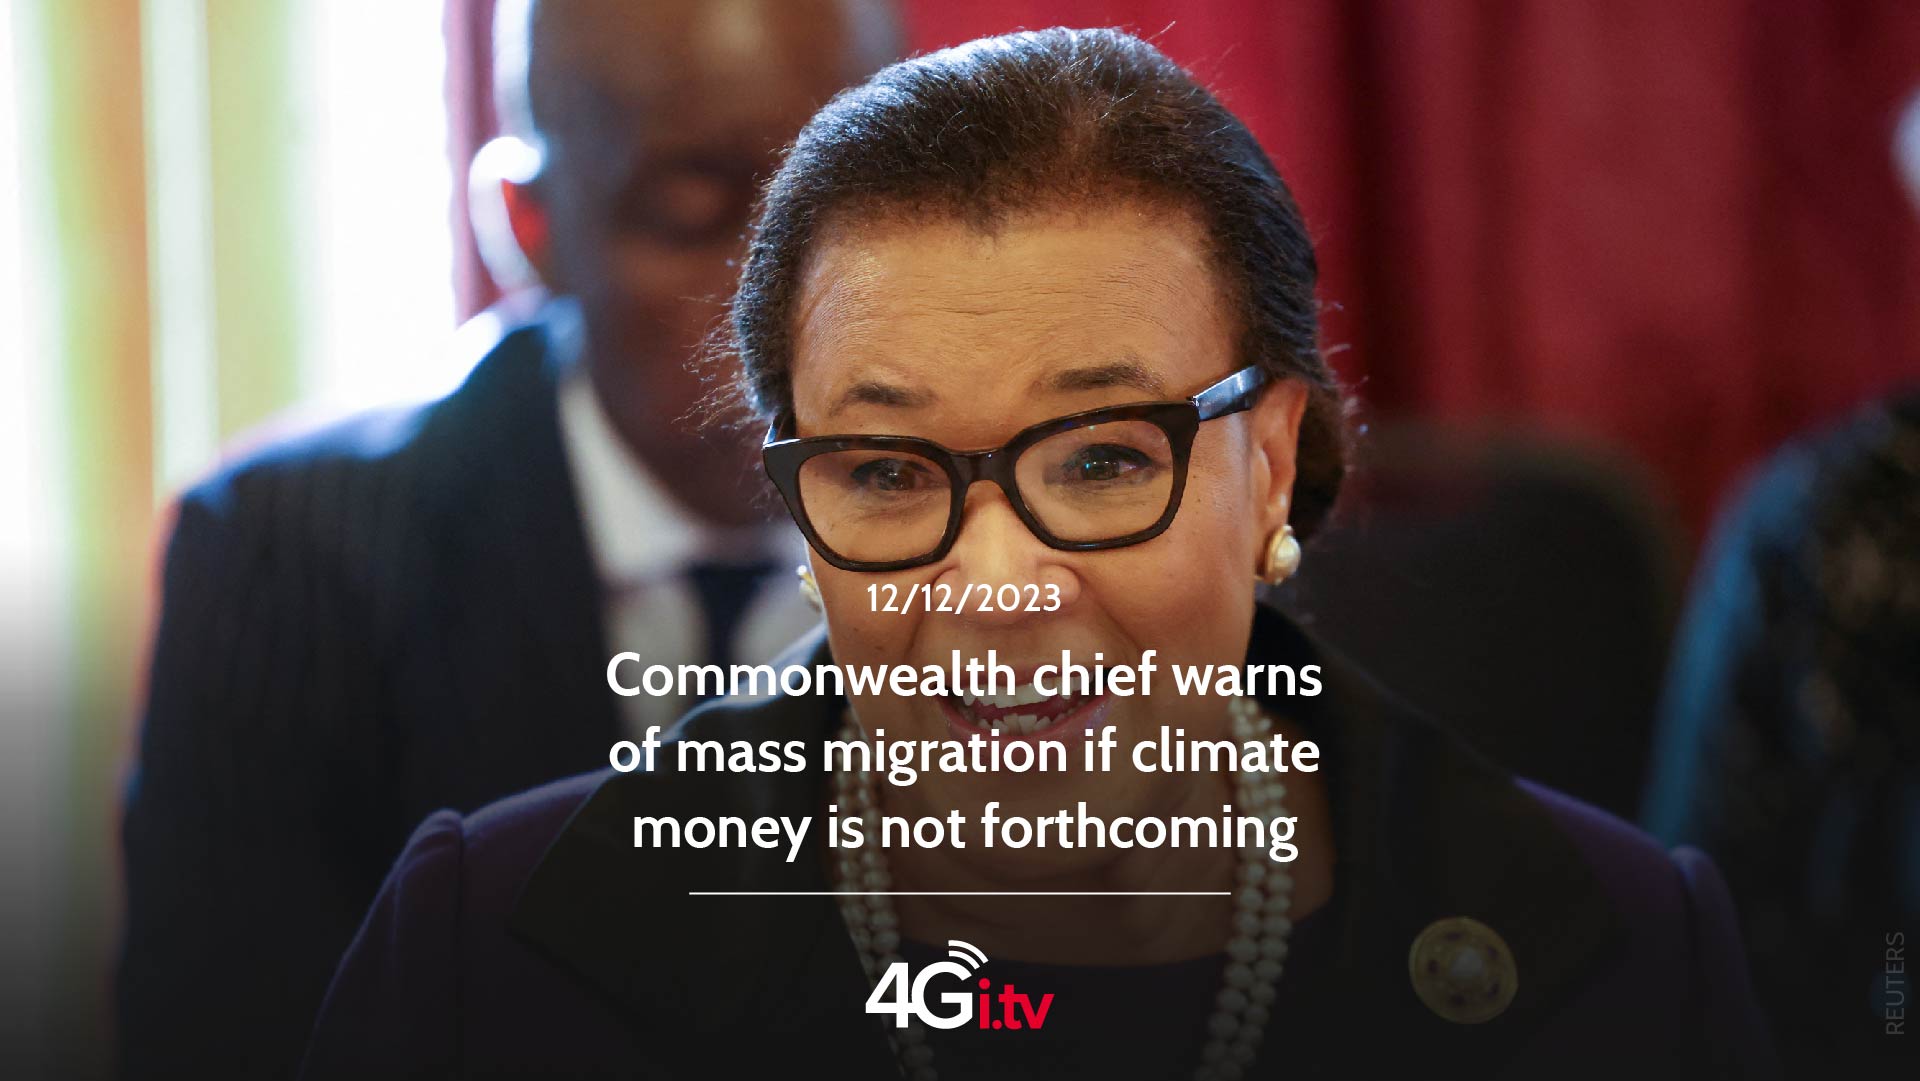 Lesen Sie mehr über den Artikel Commonwealth chief warns of mass migration if climate money is not forthcoming